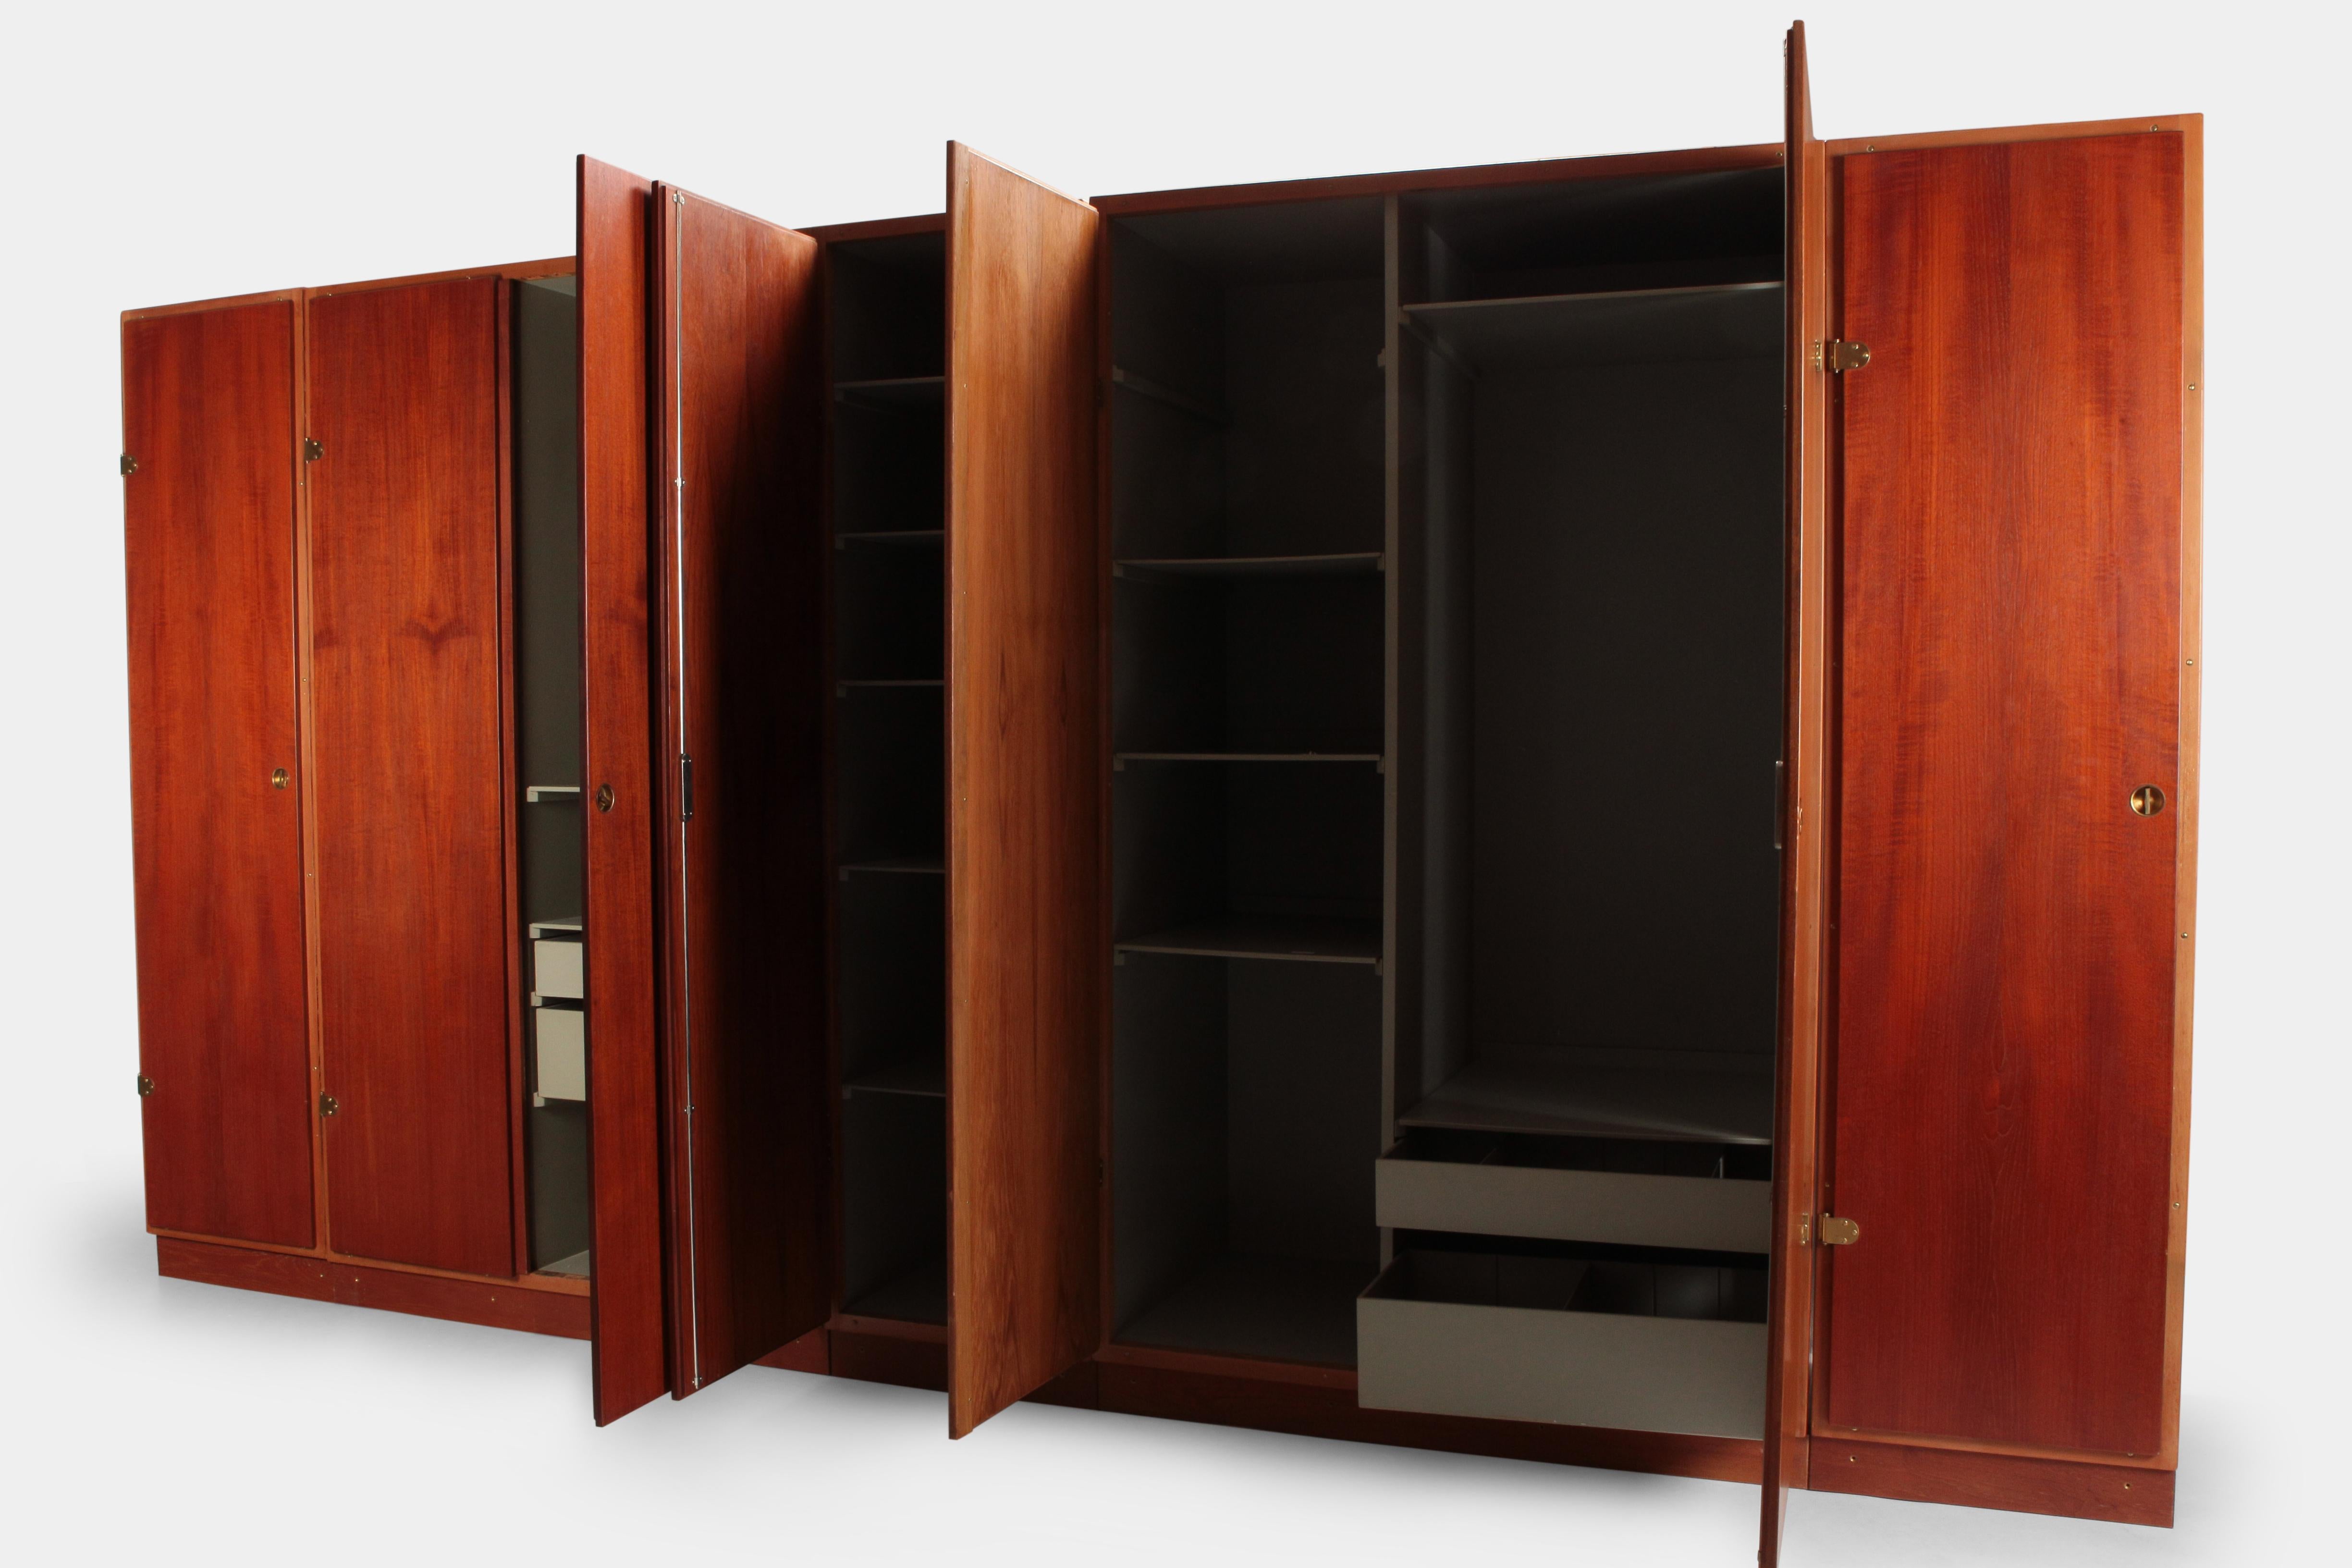 Børge Mogensen wardrobe manufactured by Karl Andersson & Söner in the 1960s in Denmark. Very generous wardrobe with several shelves, drawers and hanging mounts. The fronts are veneered with teak wood and have details made of solid brass. The inside